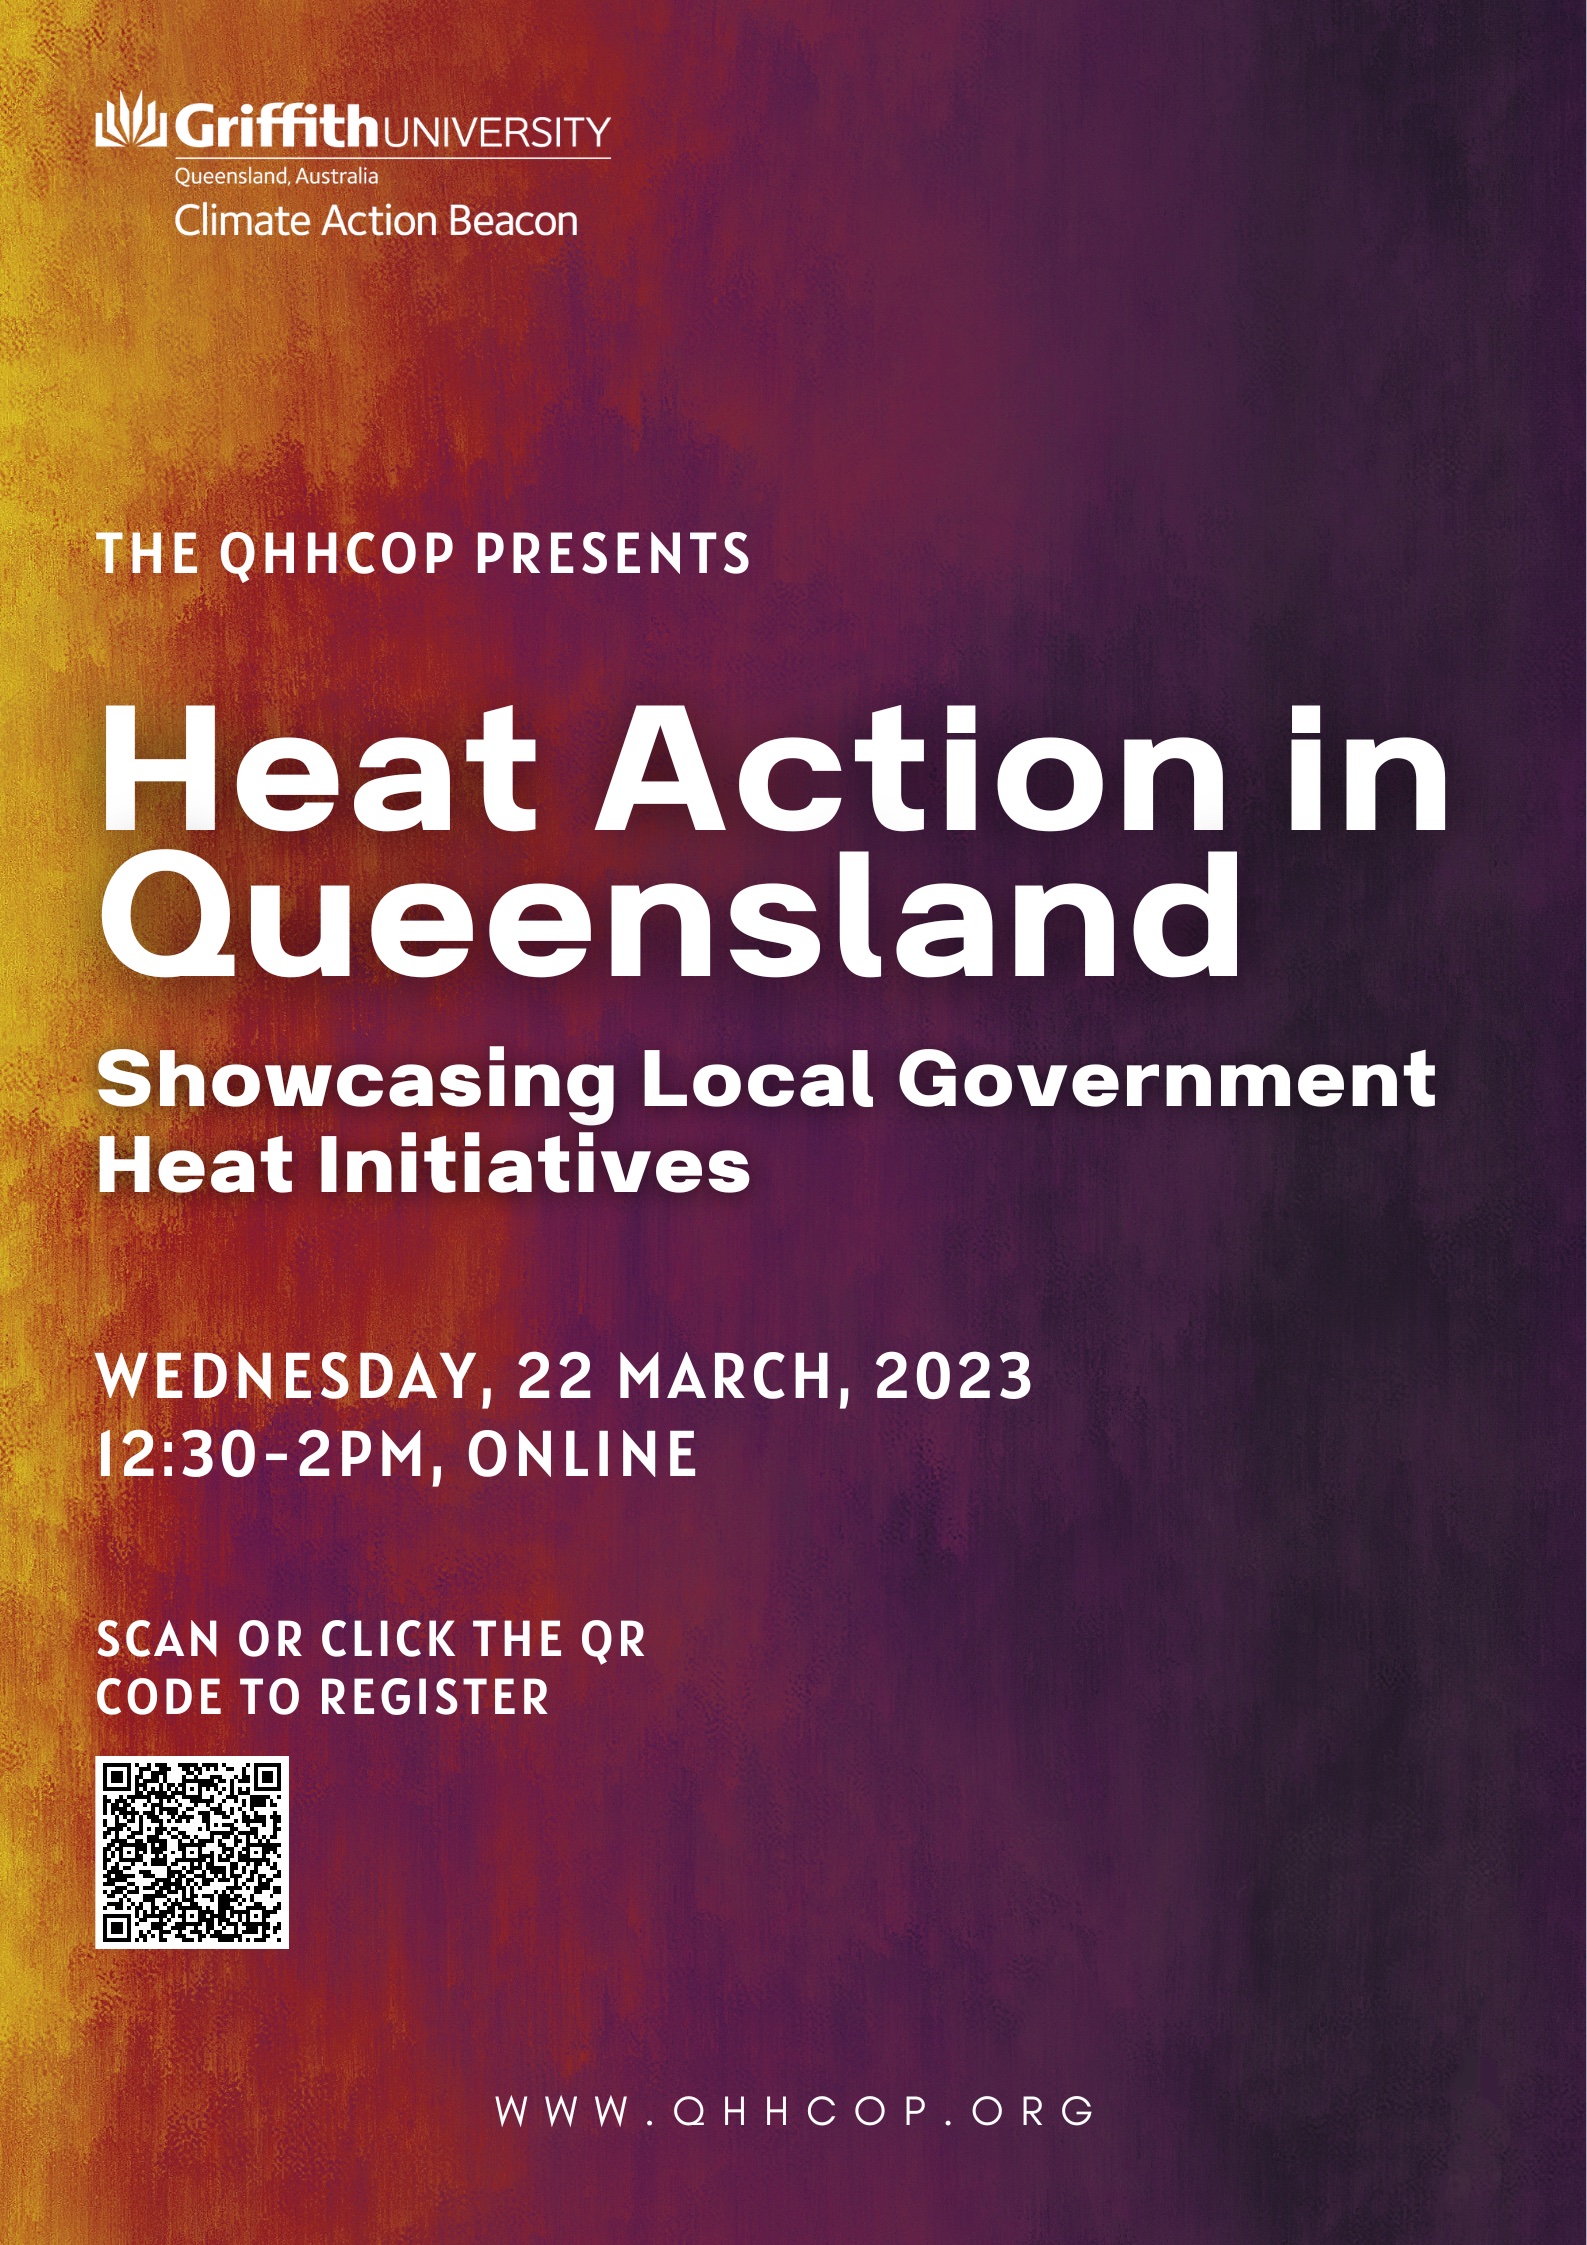 Heat Action in Queensland: A Showcase of Local Government Heat Projects